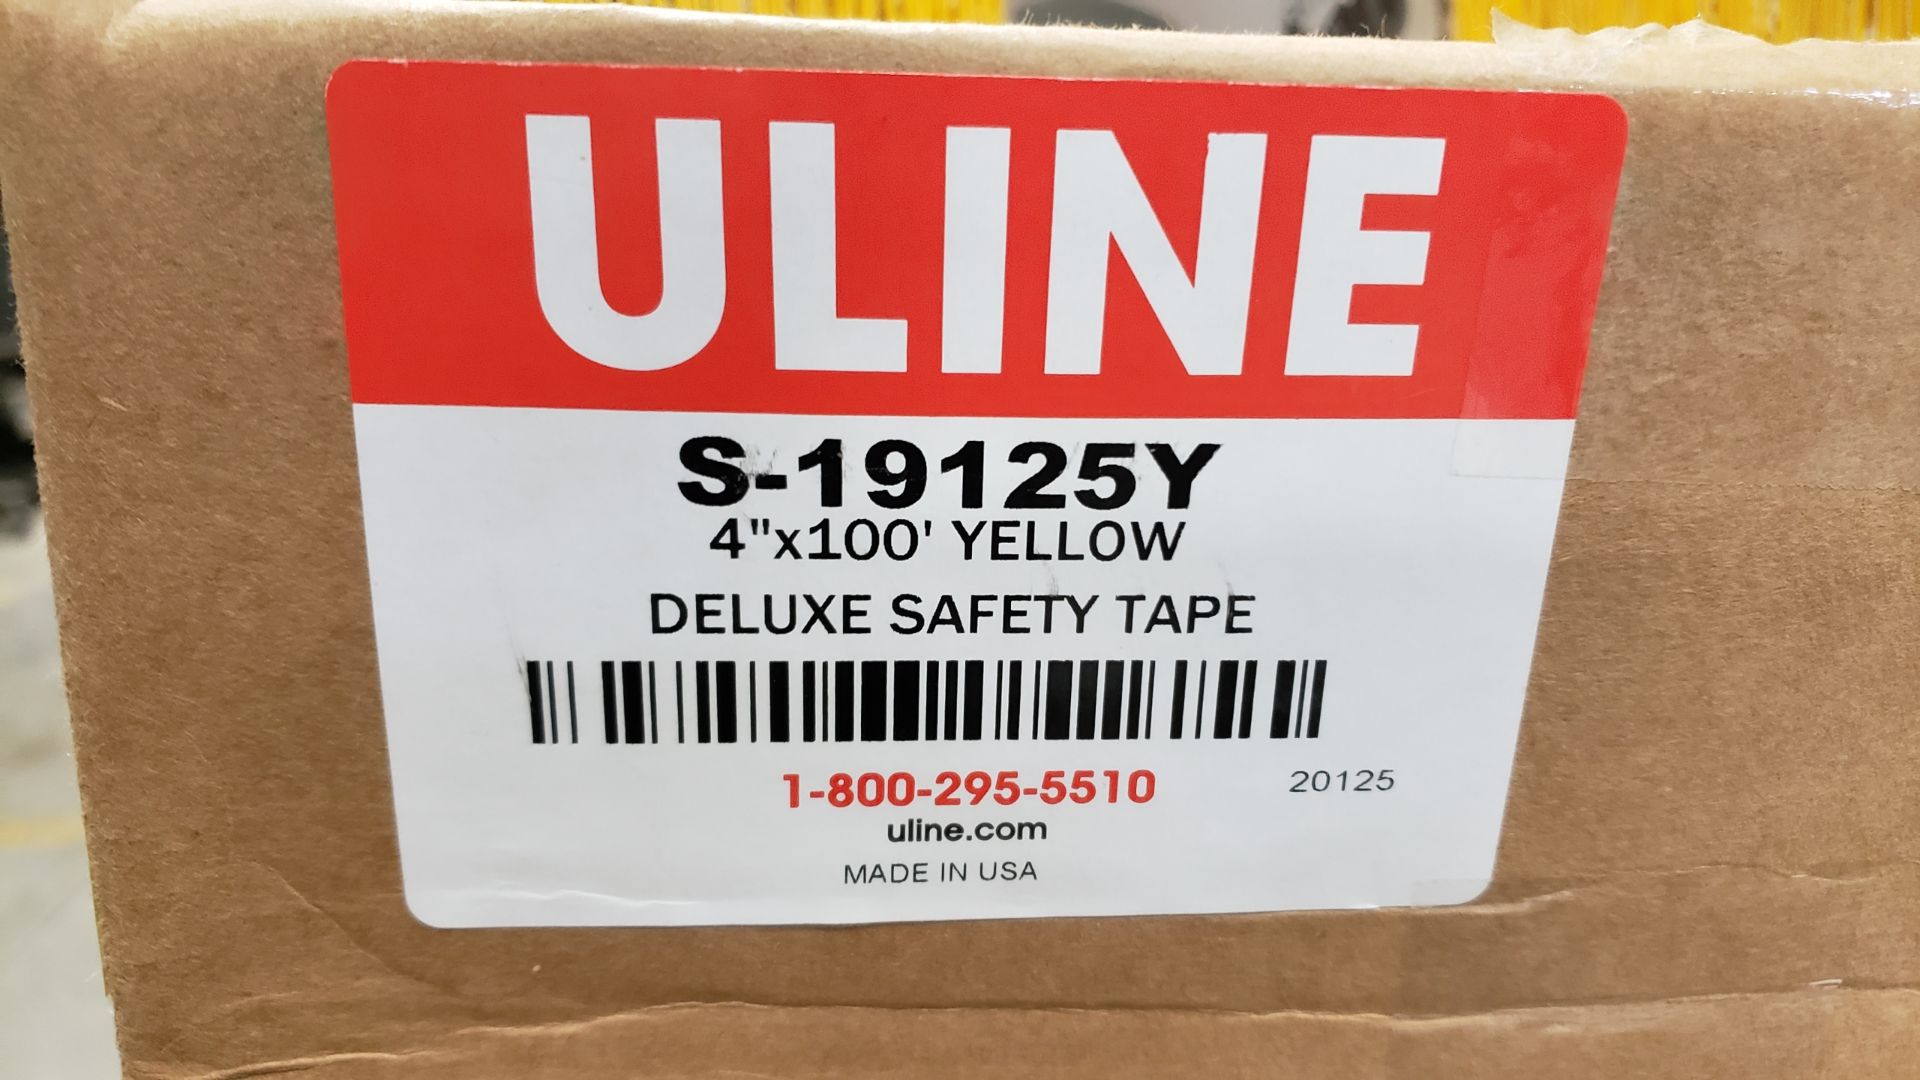 LOT - ULINE S-19125Y 4" X 100' YELLOW DELUXE SAFETY TAPE - Image 4 of 4